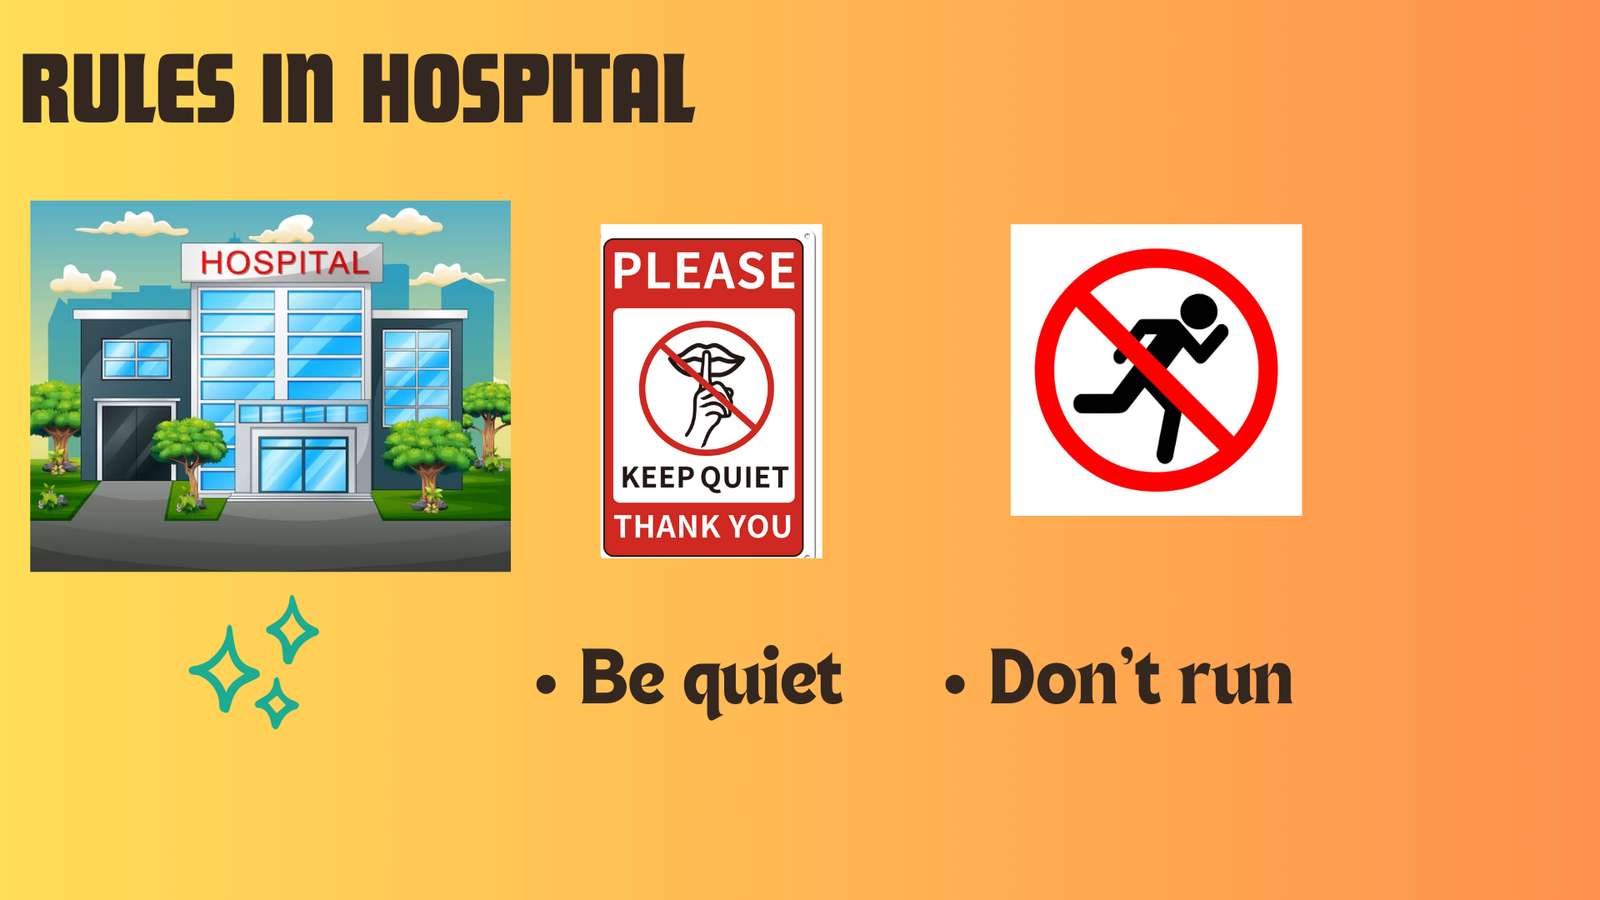 RULES IN HOSPITAL puzzle online from photo